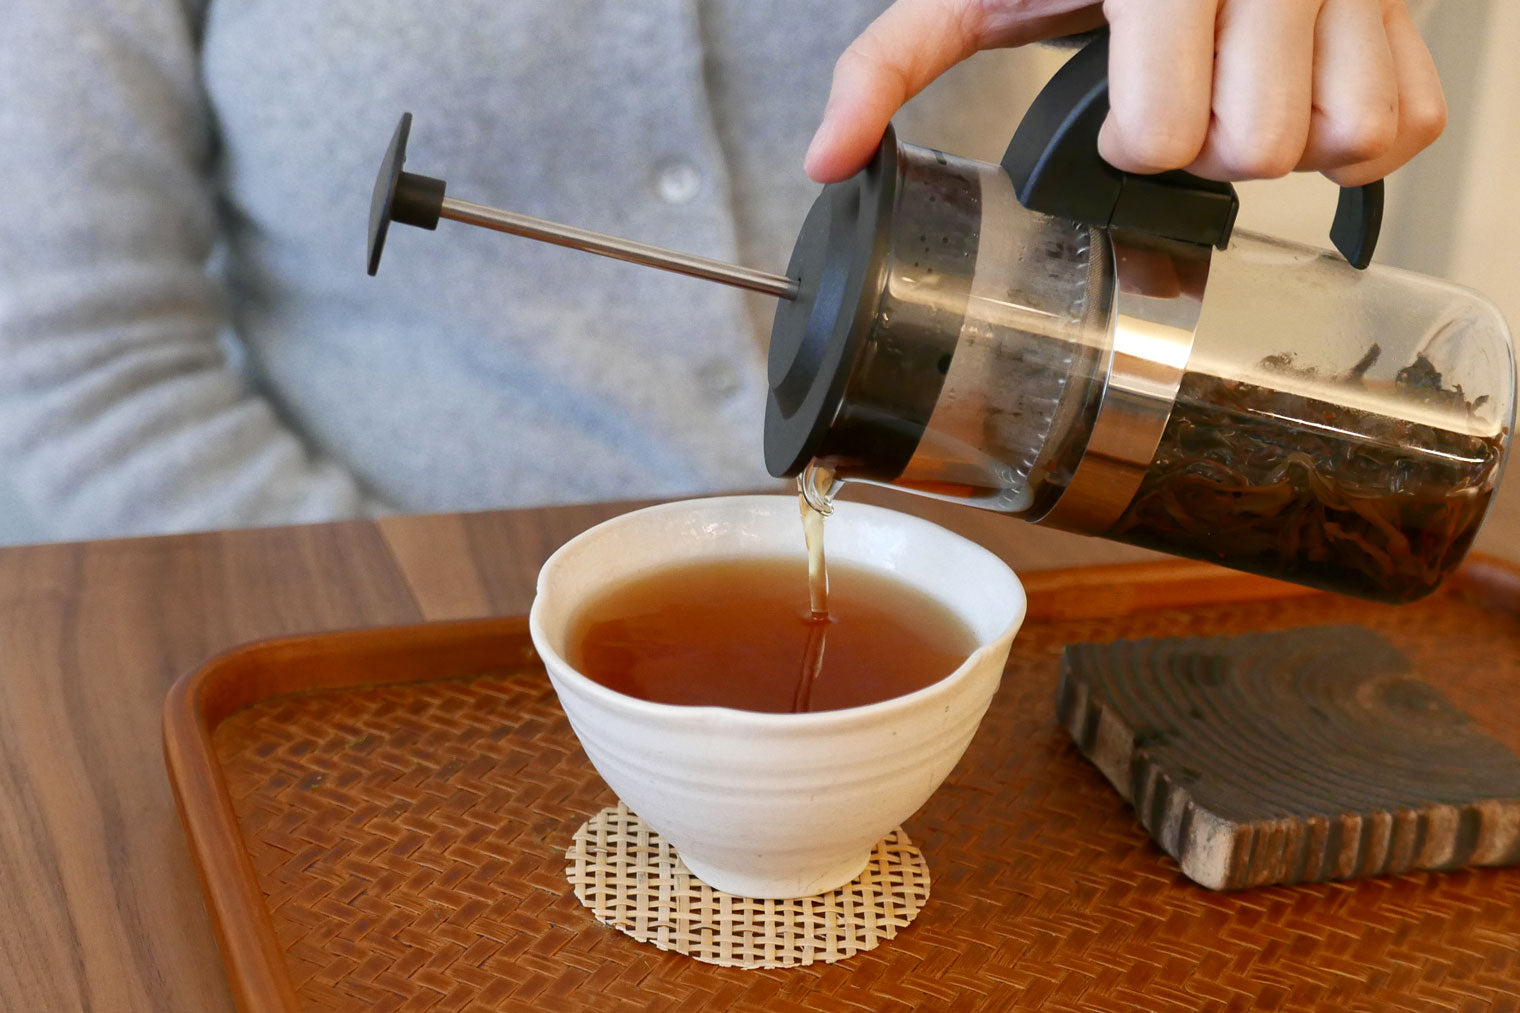 How to Make Tea with a French Press